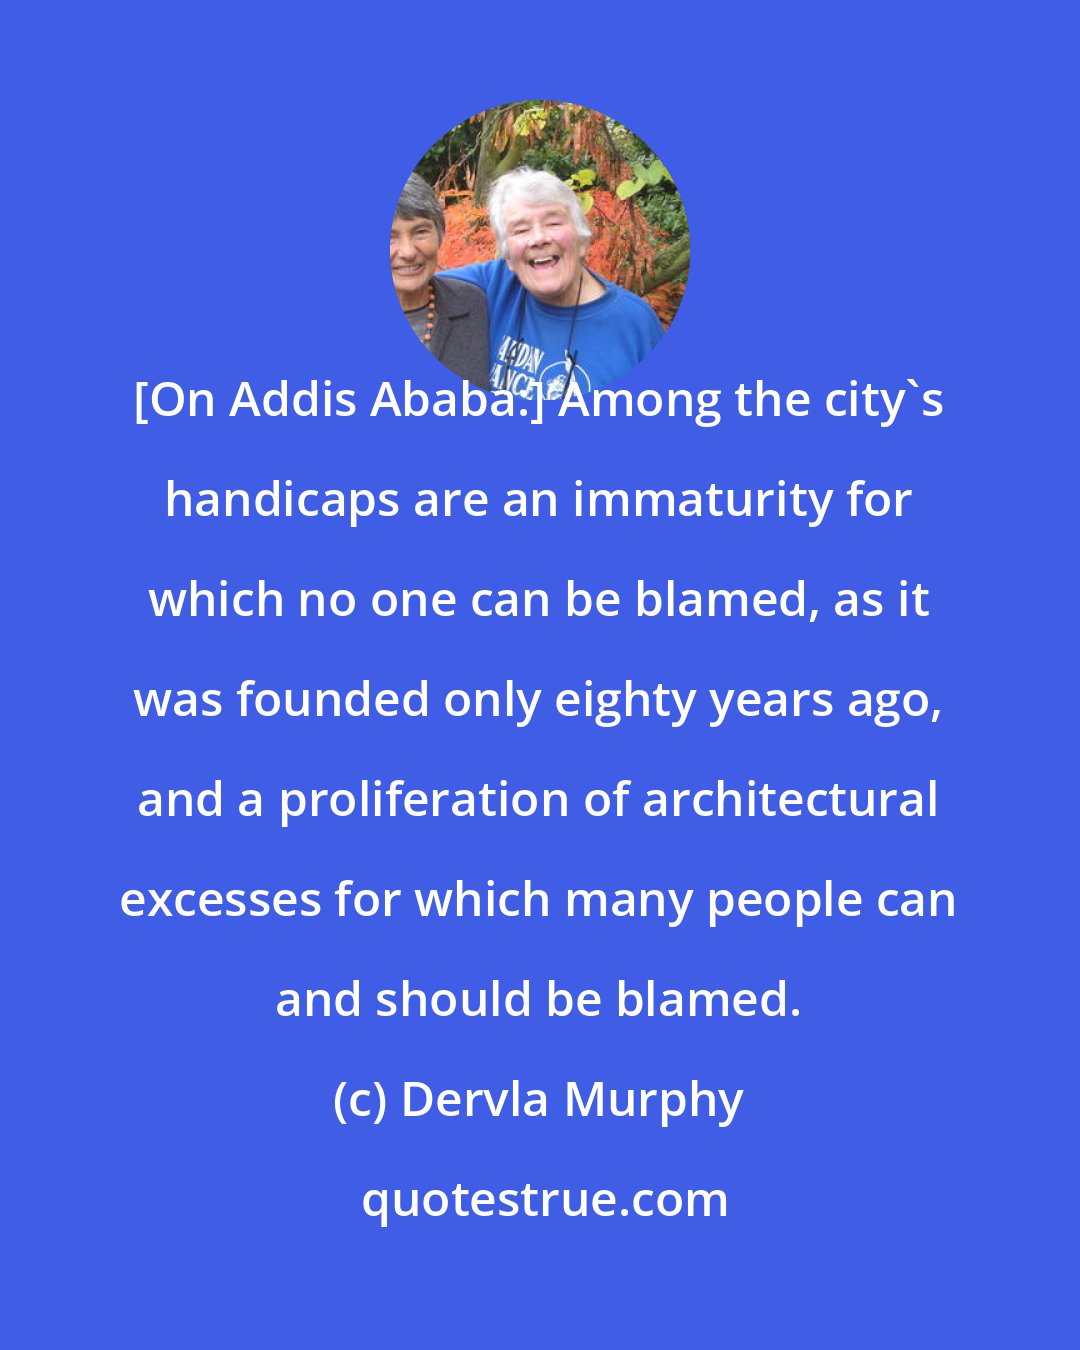 Dervla Murphy: [On Addis Ababa:] Among the city's handicaps are an immaturity for which no one can be blamed, as it was founded only eighty years ago, and a proliferation of architectural excesses for which many people can and should be blamed.